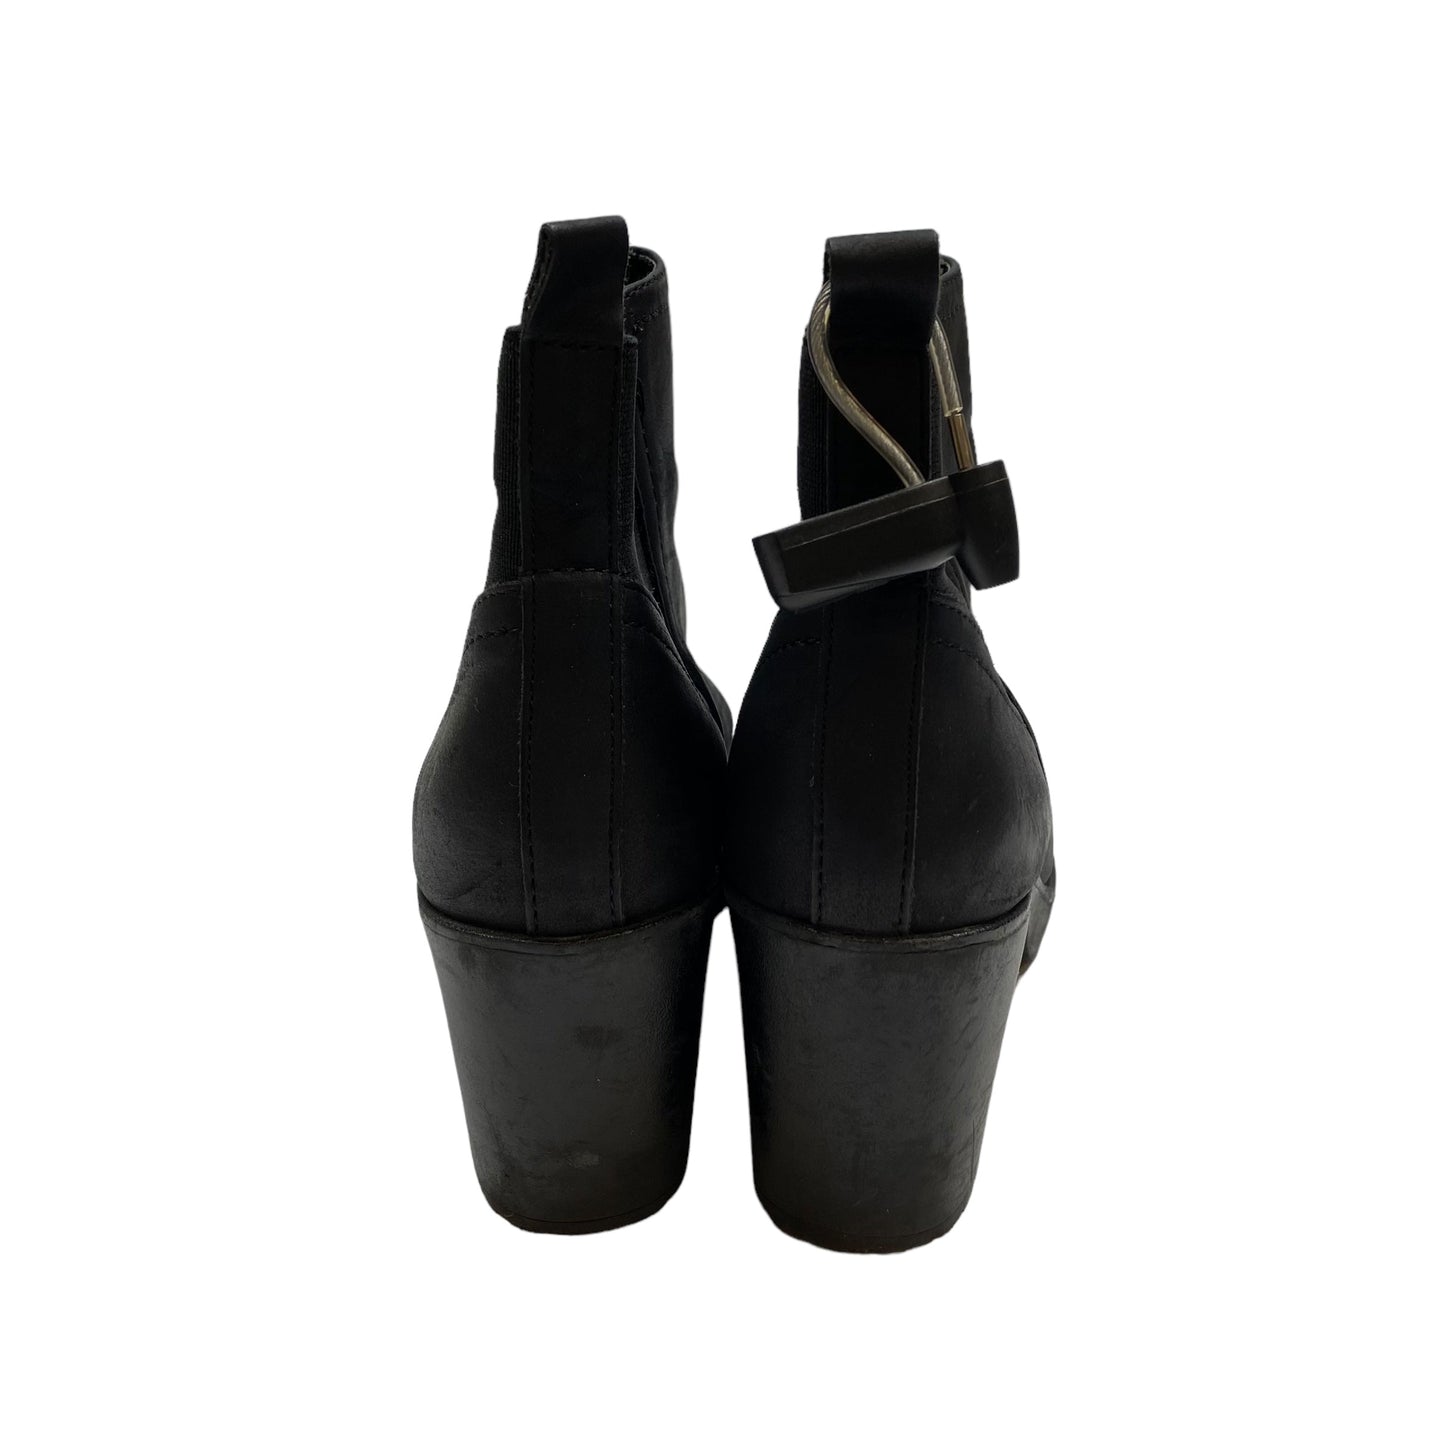 Black Boots Ankle Heels Xappeal, Size 8